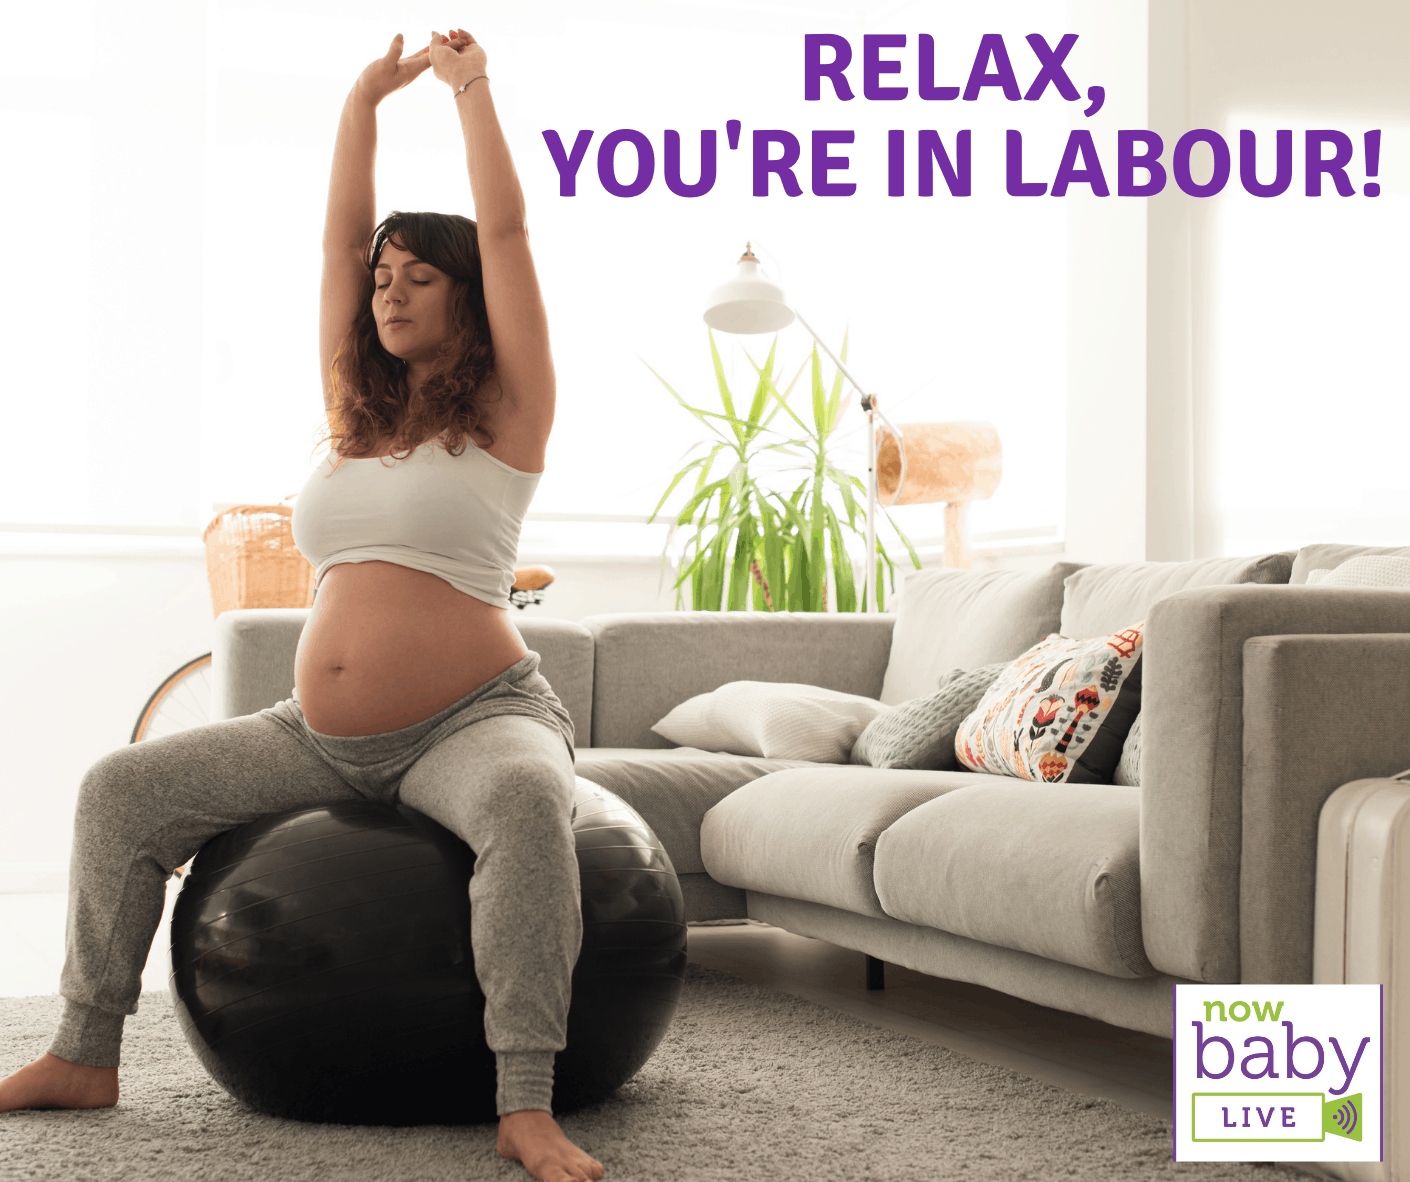 Relax, you’re in labour!